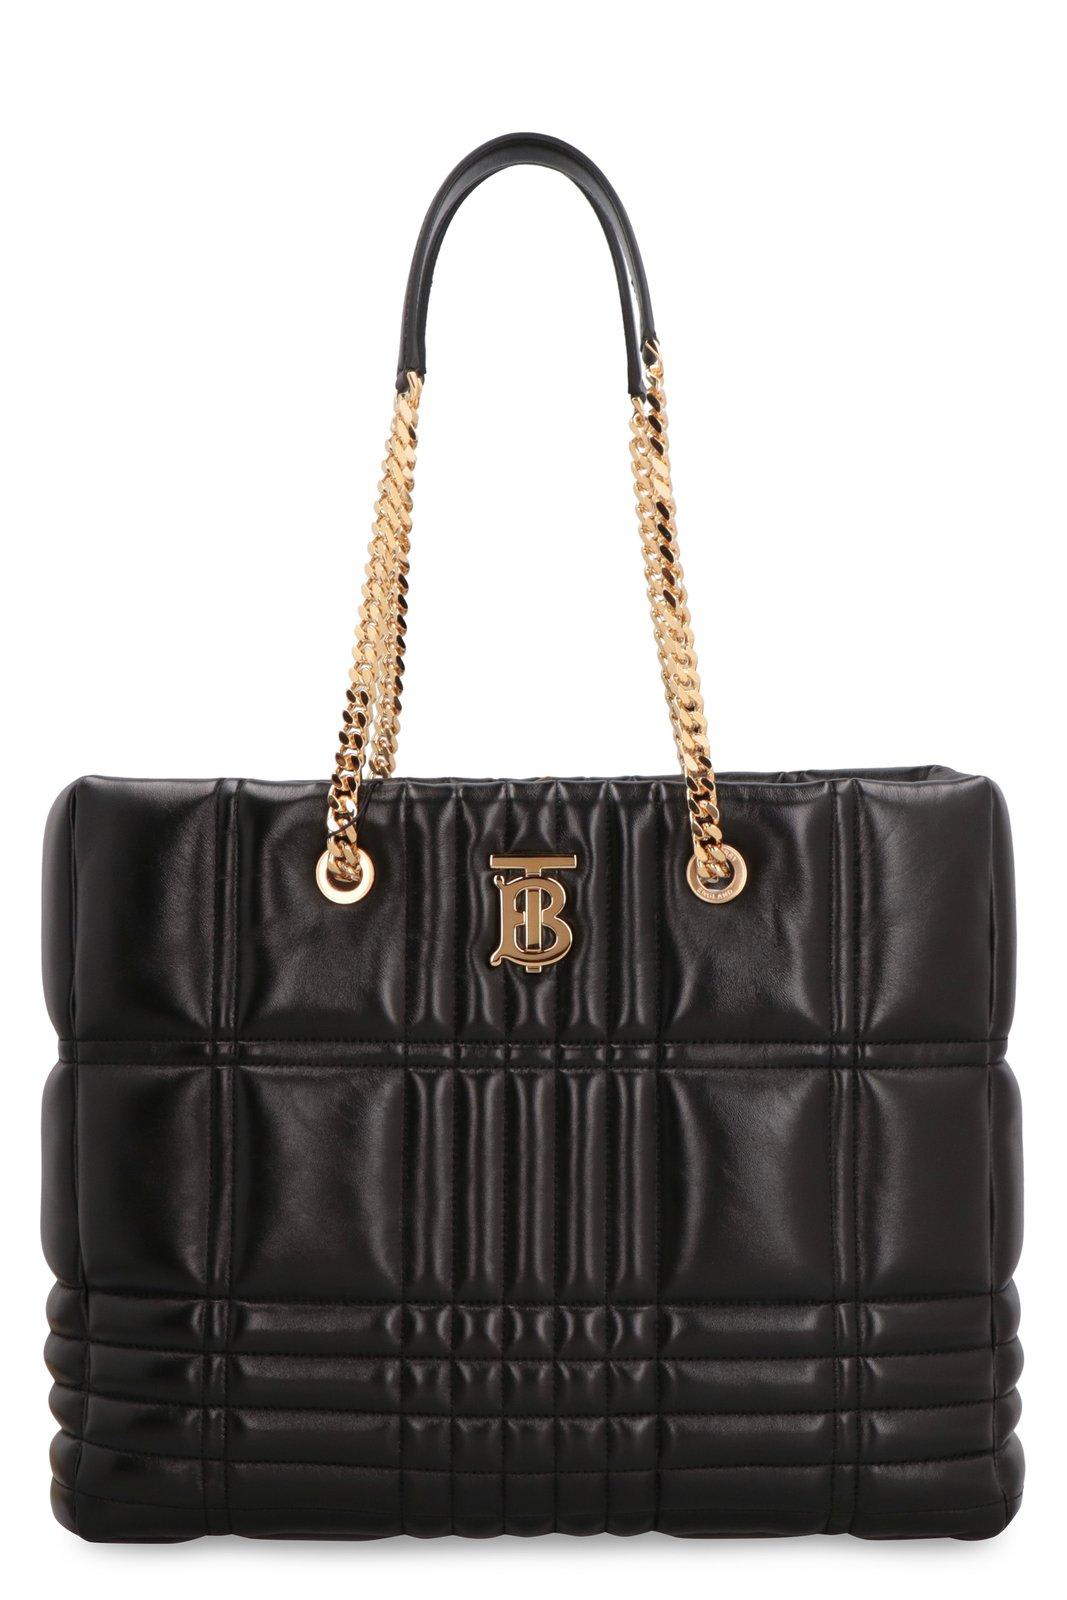 Burberry Lola Quilted Tote Bag